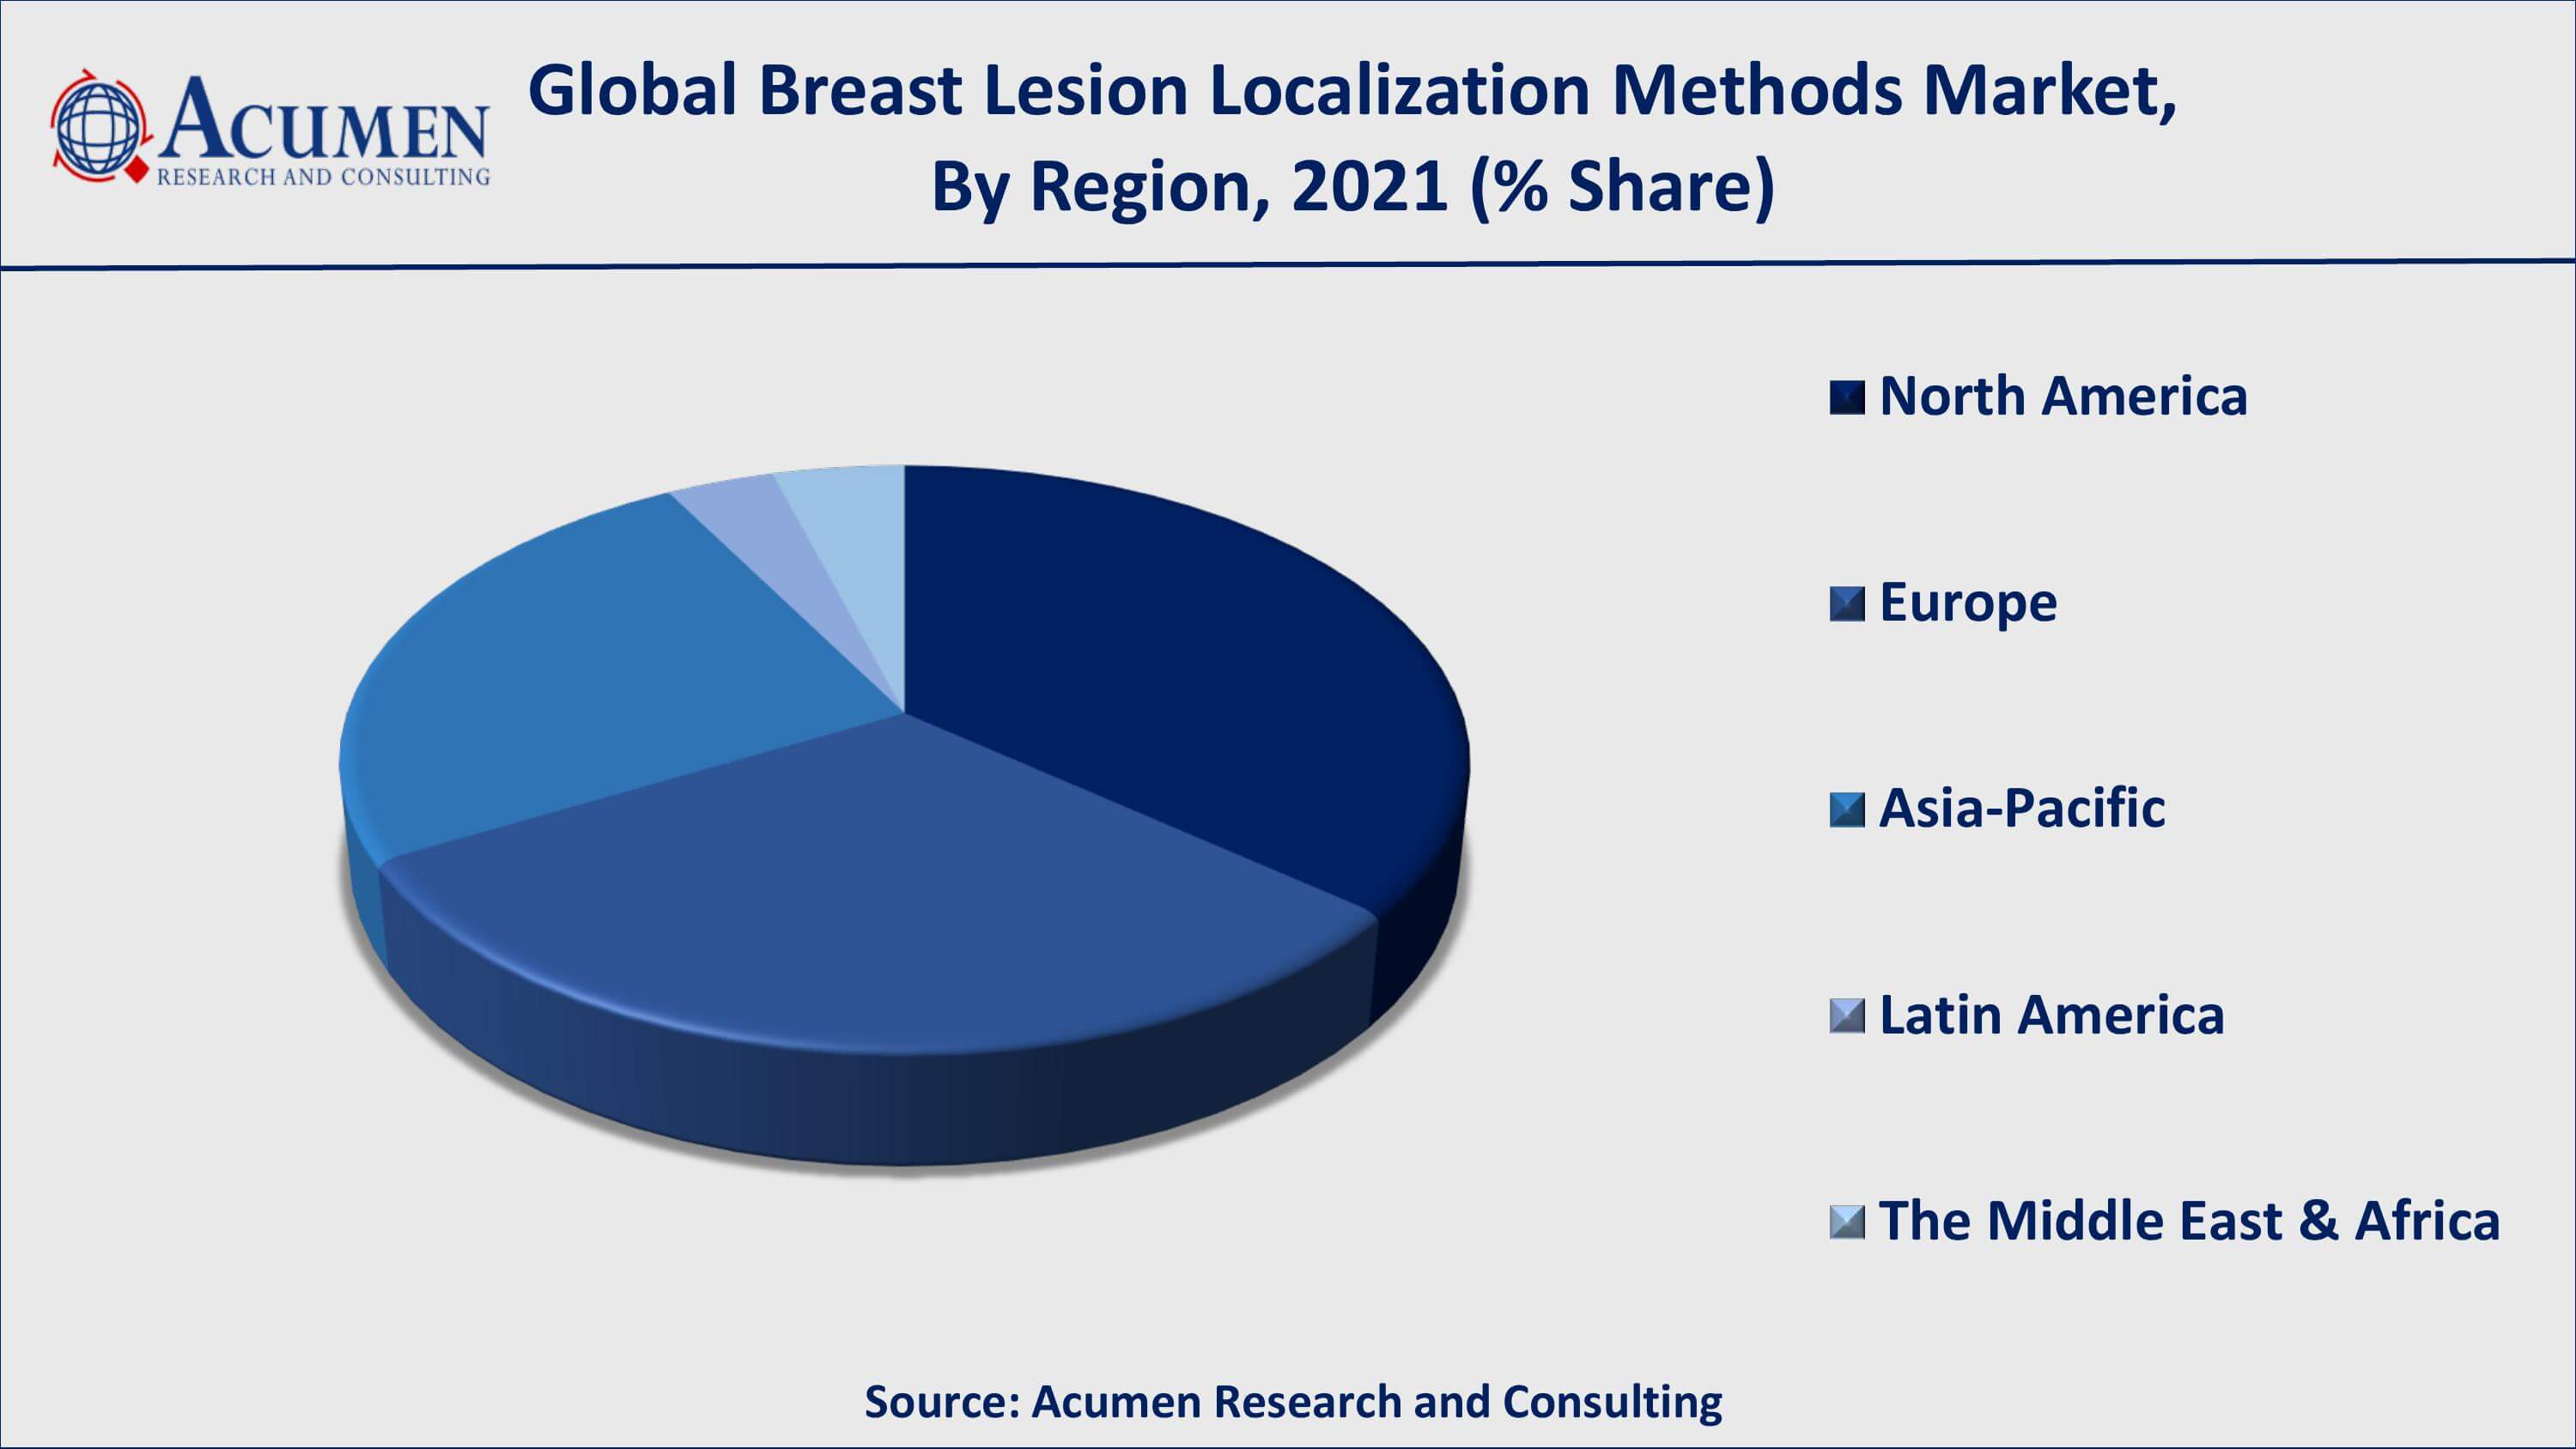 Growing prevalence of breast cancer will fuel the global breast lesion localization methods market value